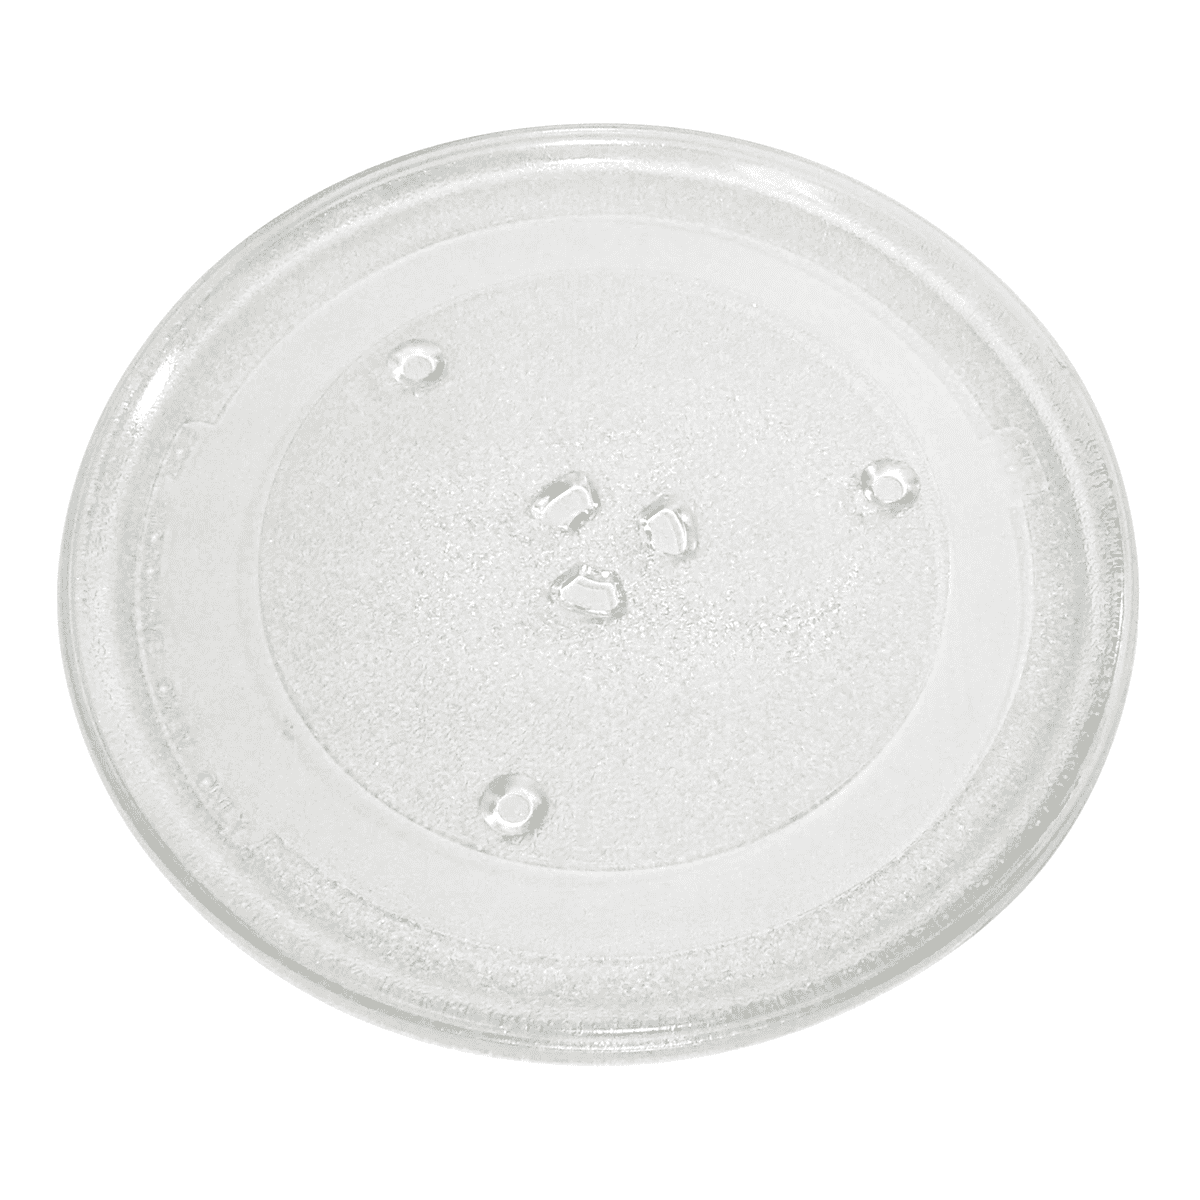 replacement microwave turntable glass plate & ring 11 1/4" diameter 